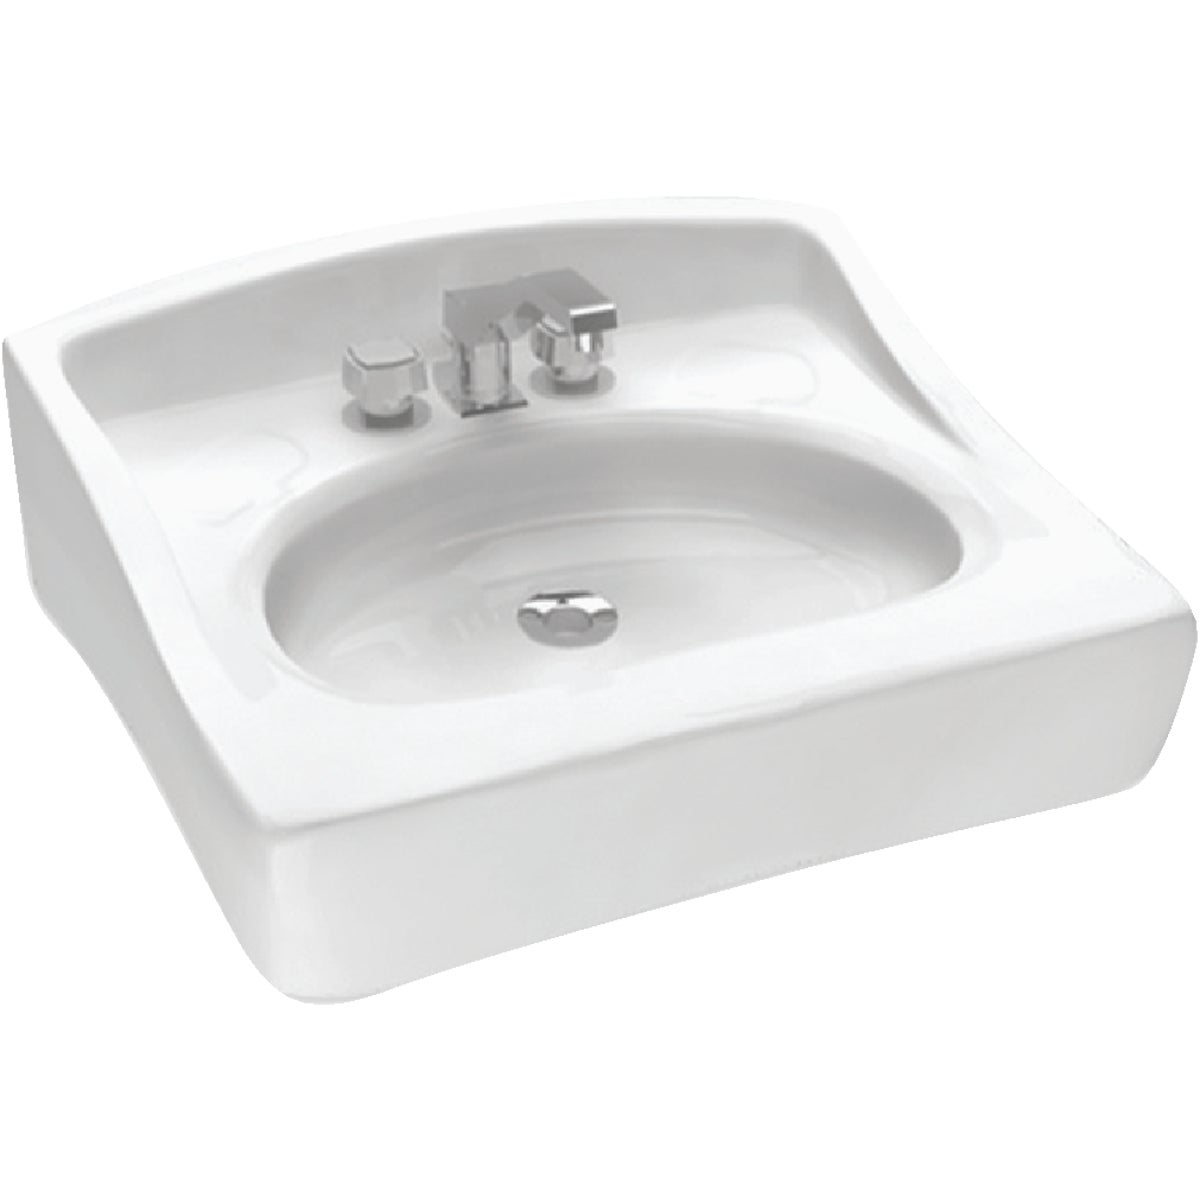 Item 403489, Caribe wall hung lavatory bowl, 4 In., white.